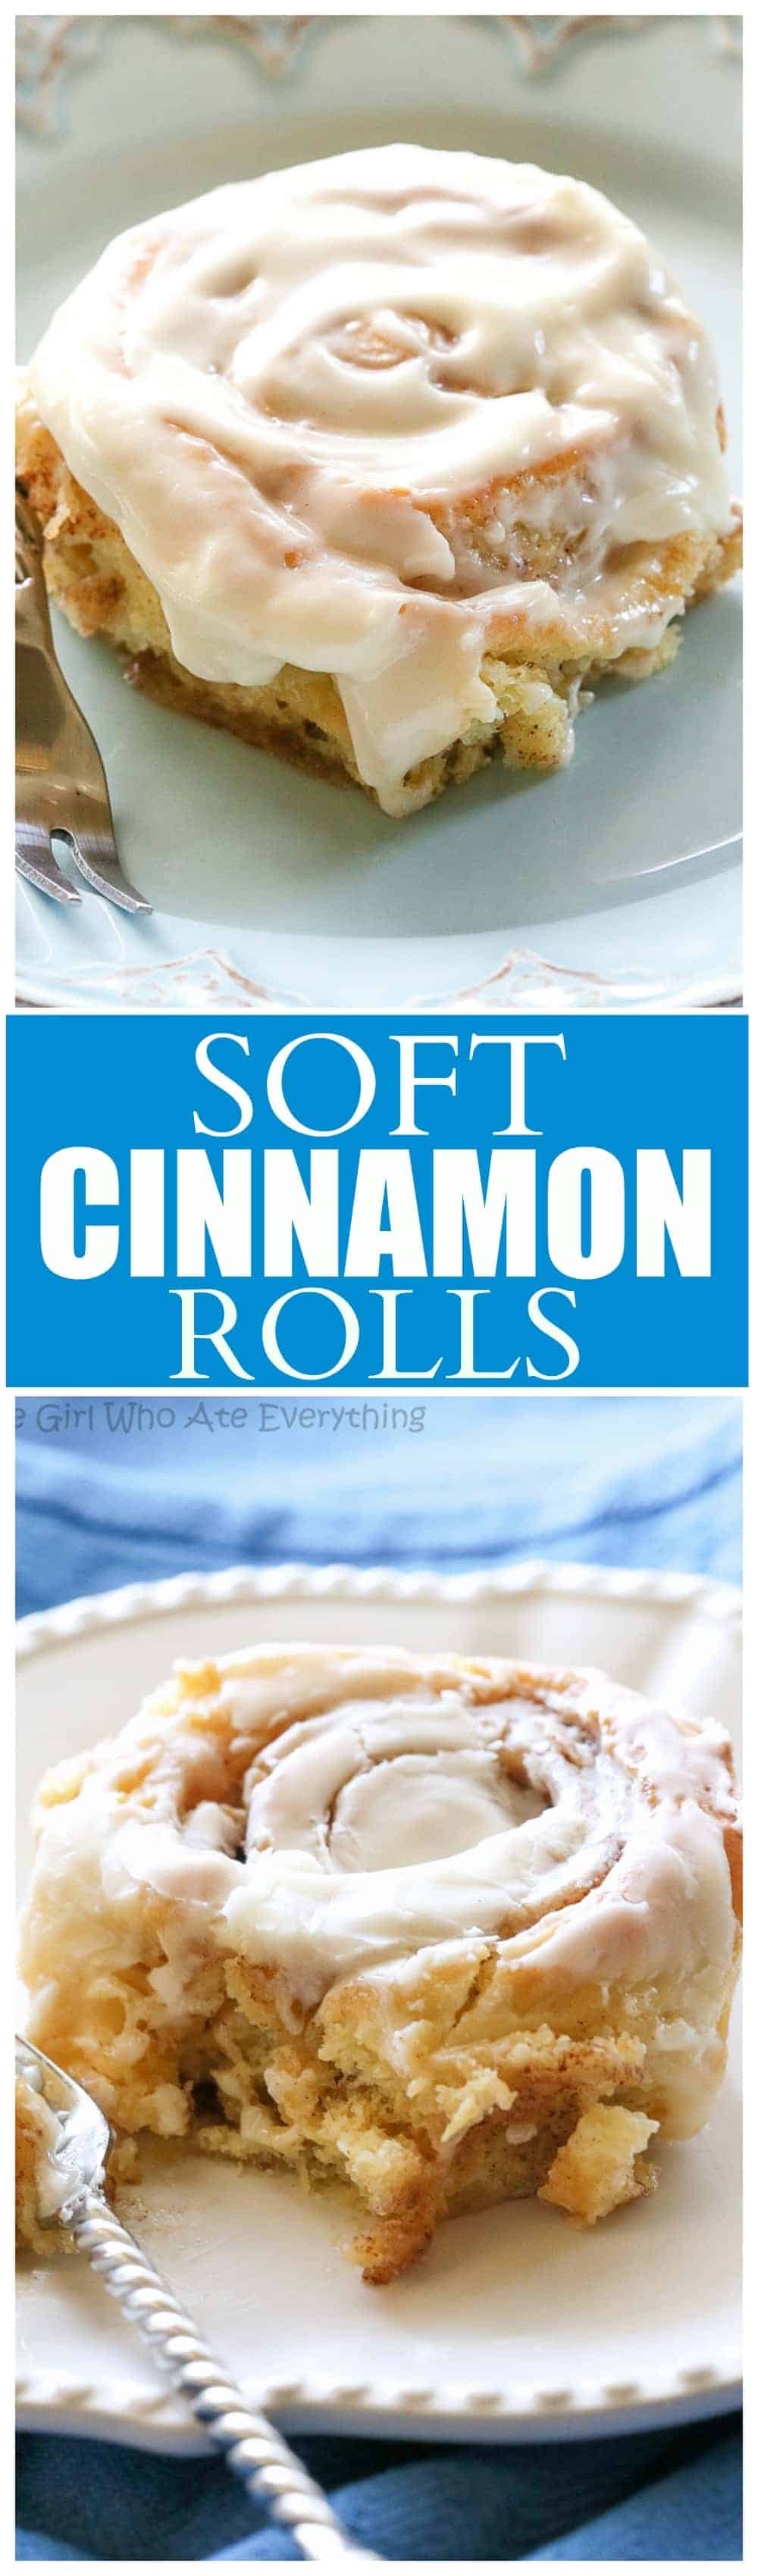 Soft Cinnamon Rolls - no-fail cinnamon rolls that are so soft and covered with cream cheese frosting. #homemade #cinnamon #rolls #scratch #recipe #breakfast